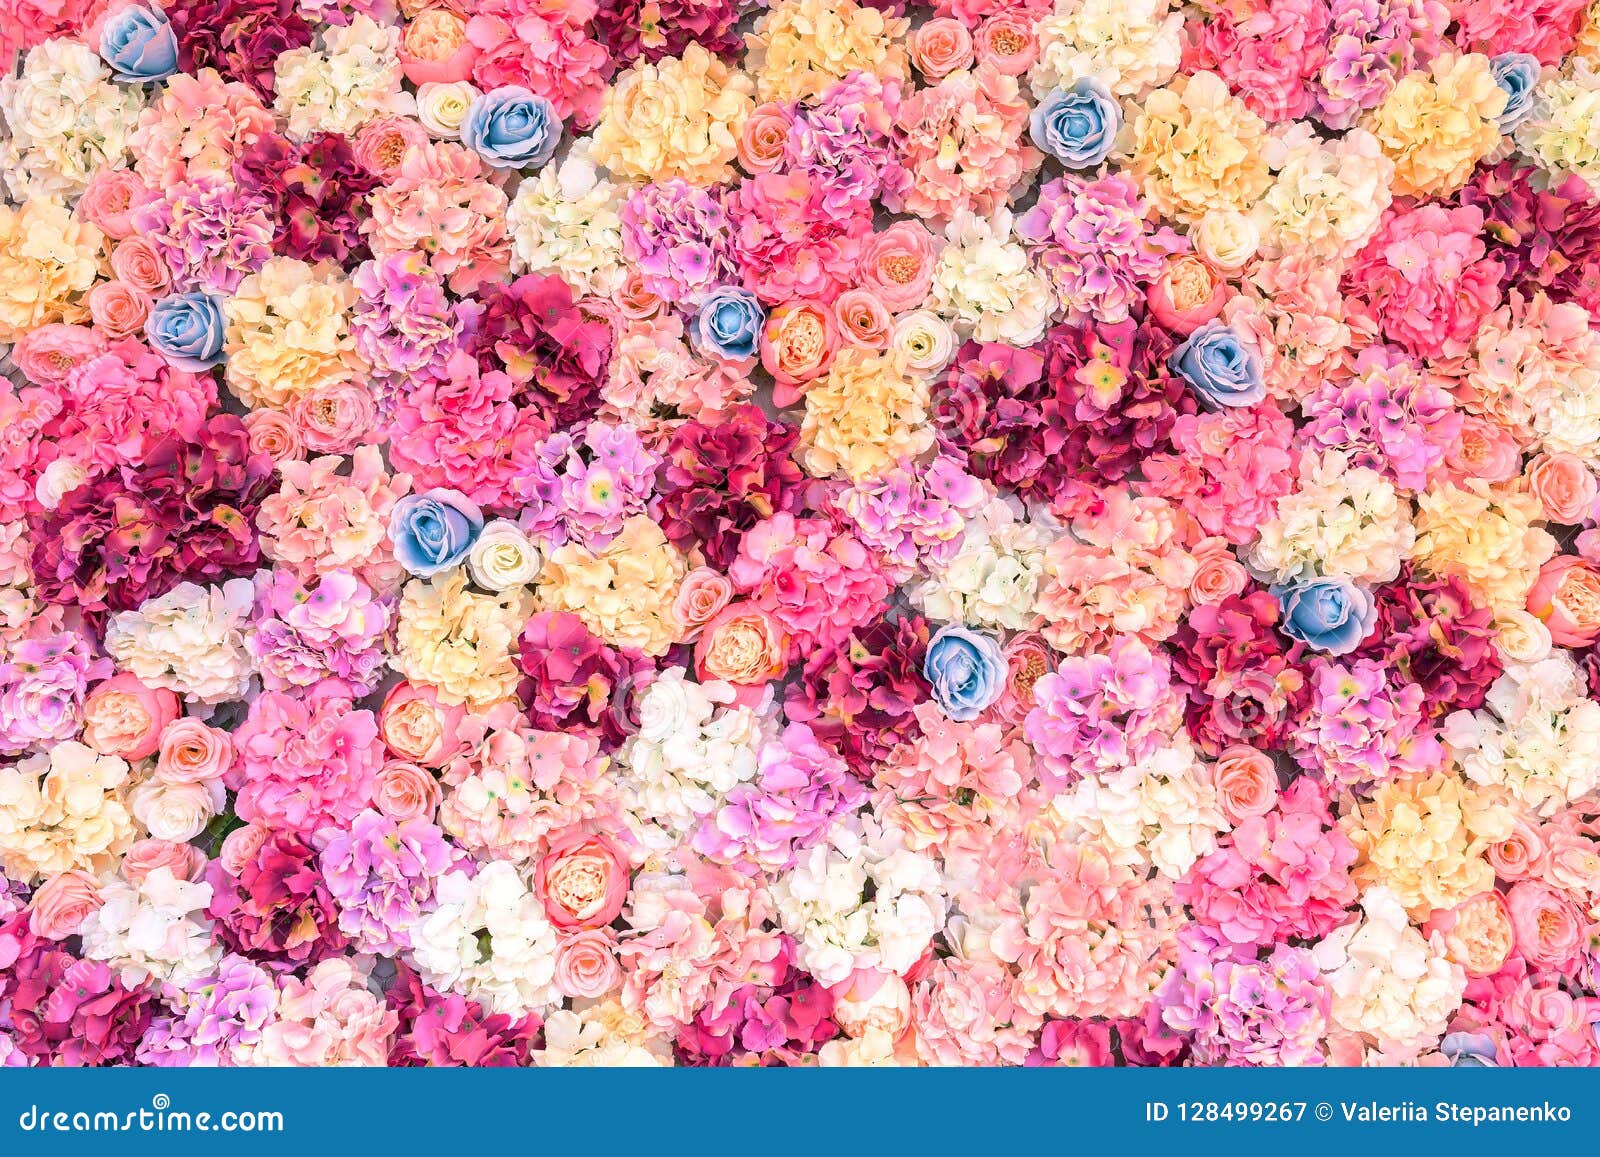 Flower Texture. Flower Wall Stock Image - Image of floral, white: 128499267